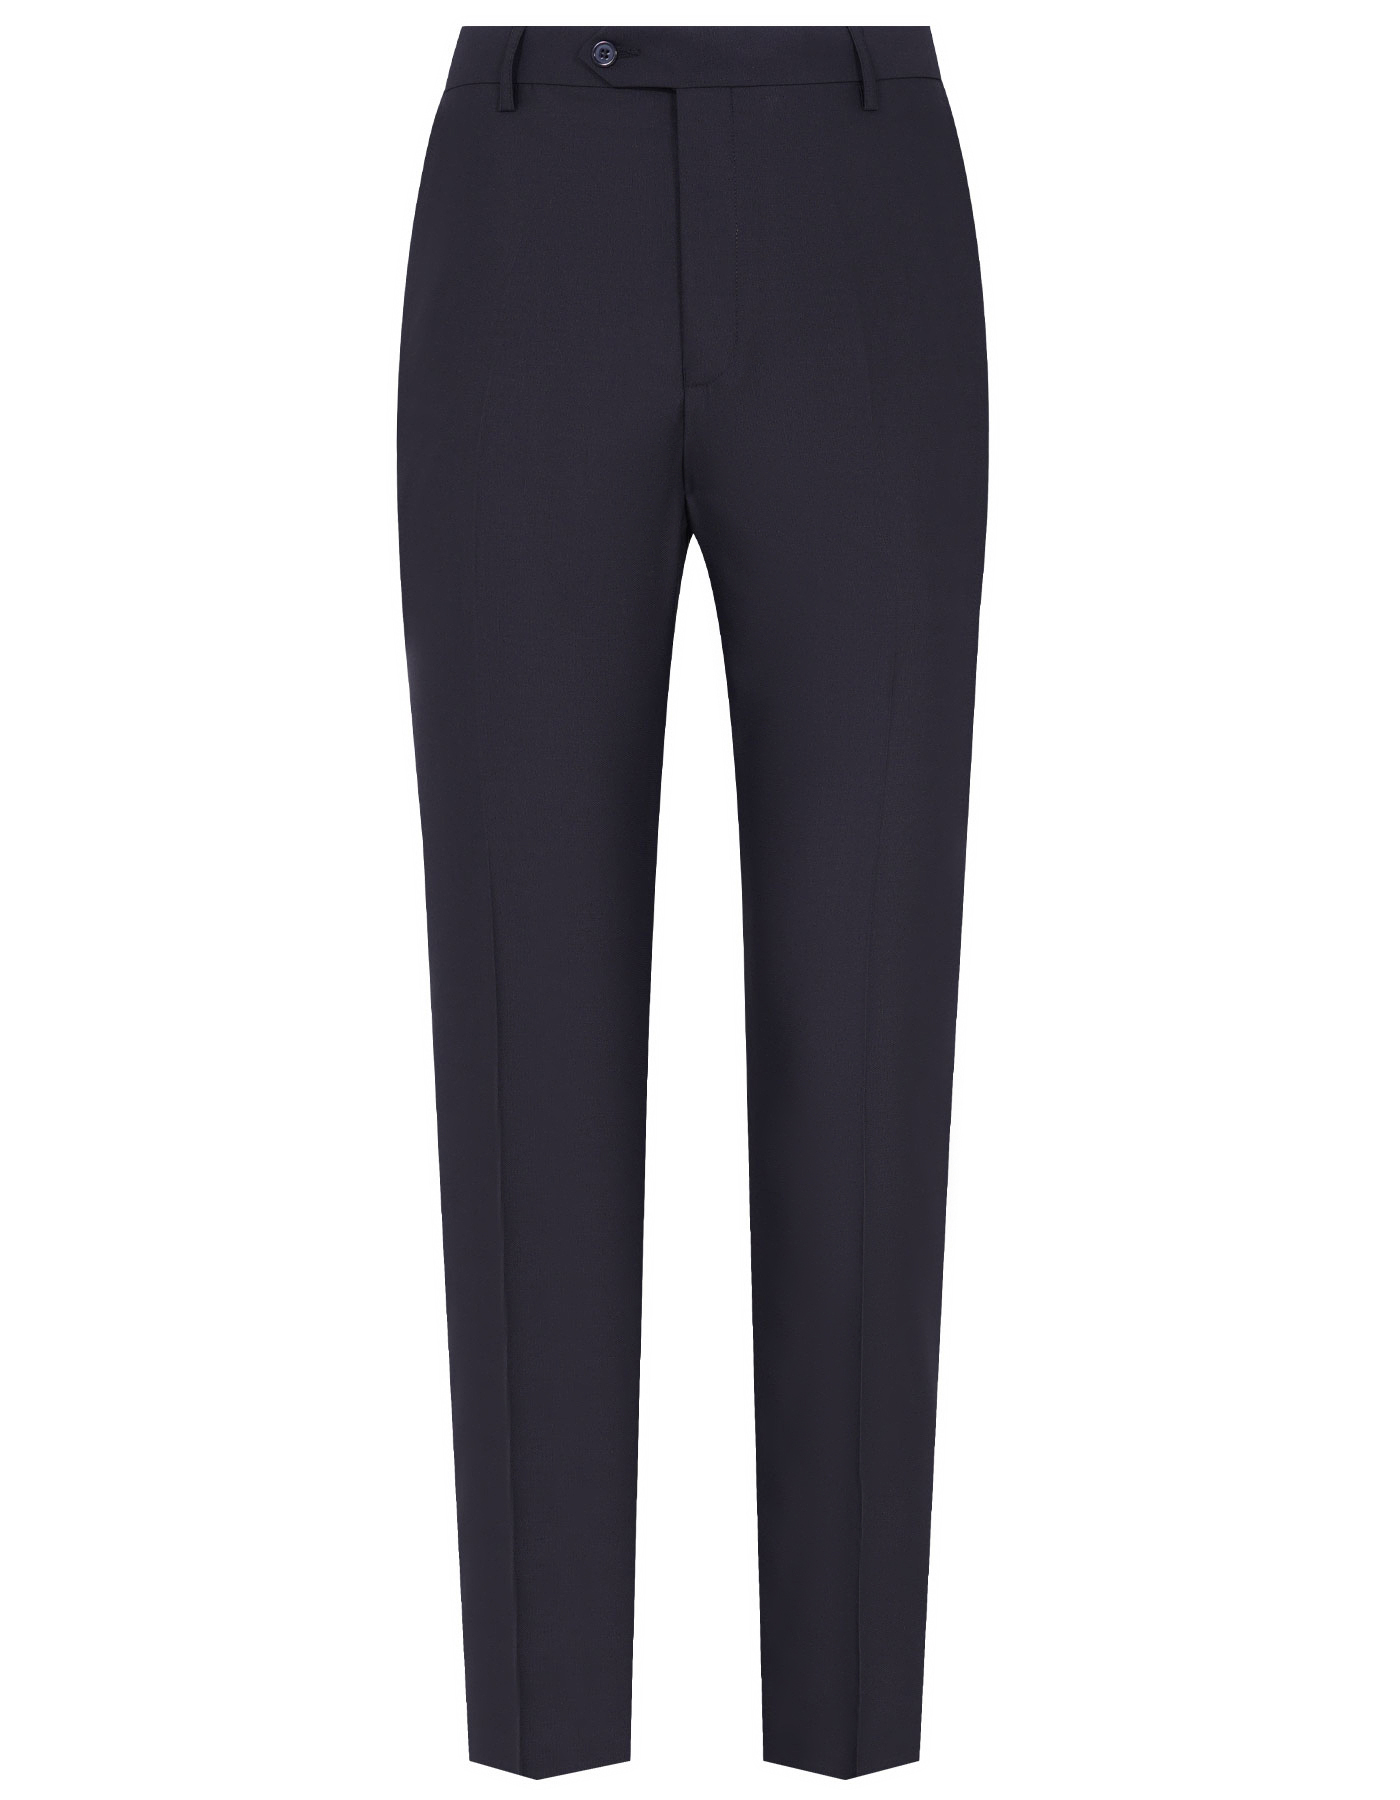 Black Texture Formal Trouser Tailored Smart Fit